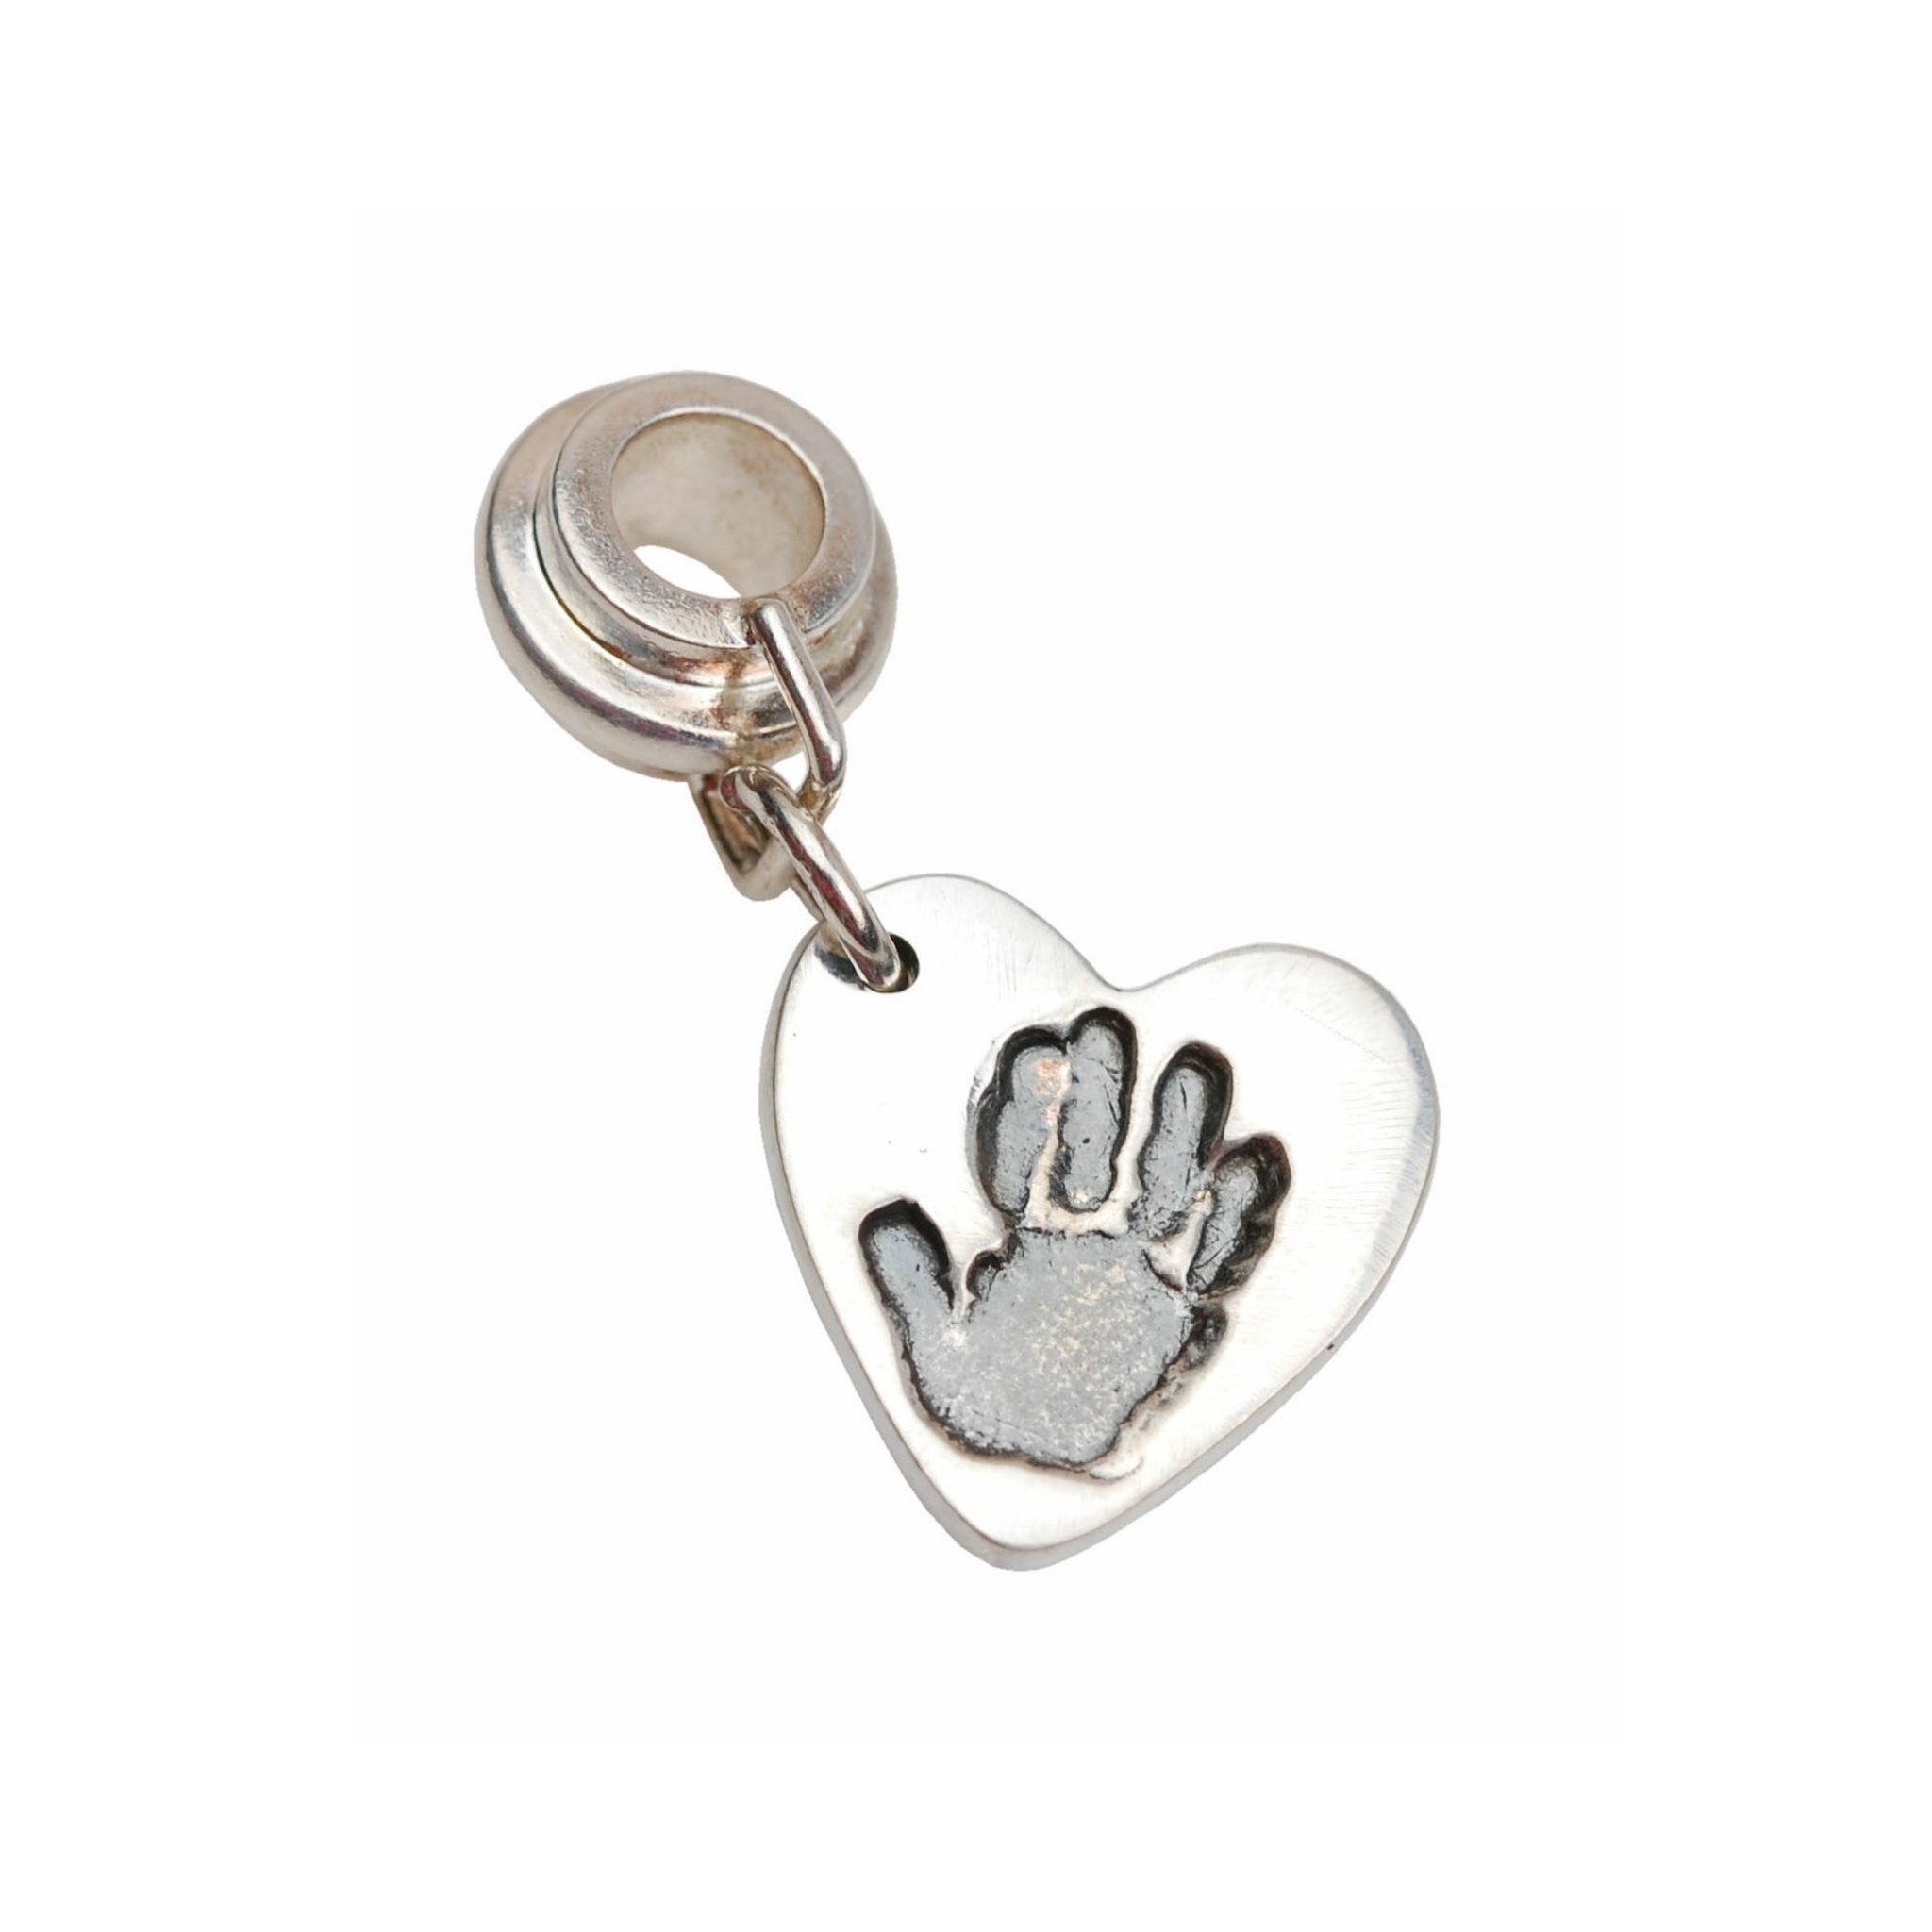 Silver heart hand print charm with charm carrier